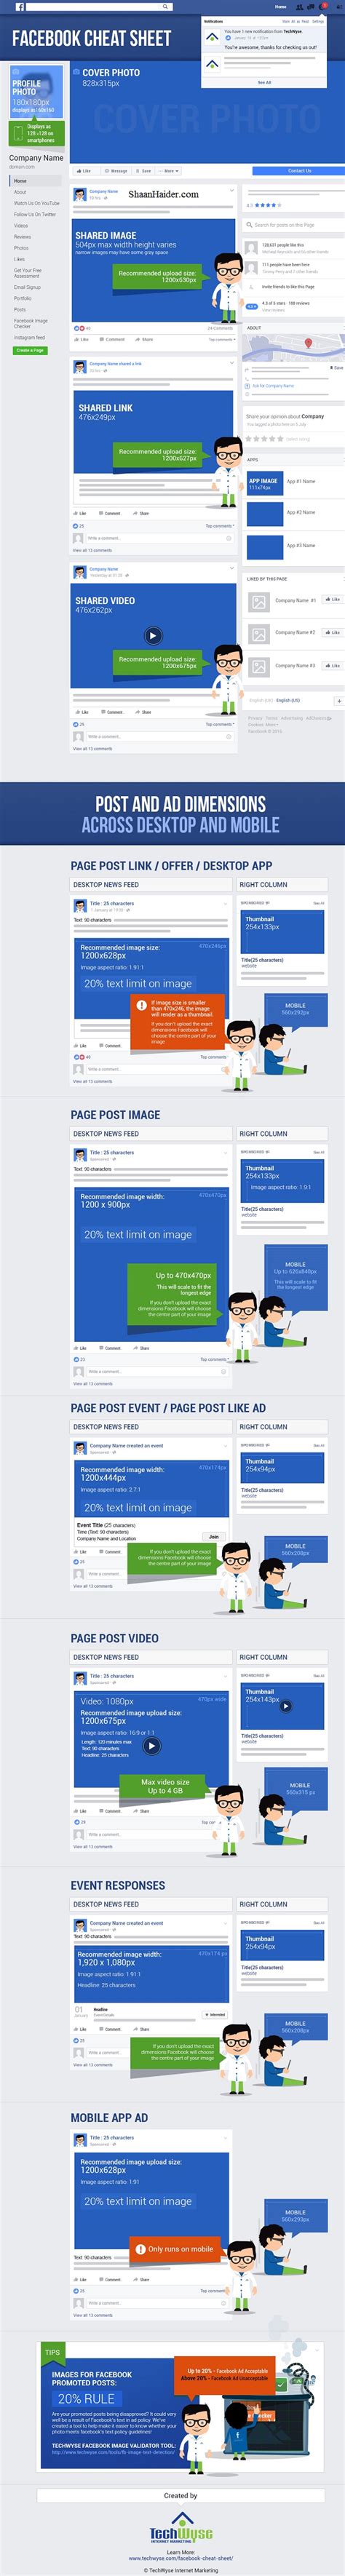 Facebook Image Size And Dimensions Cheat Sheet For 2017 Infographic